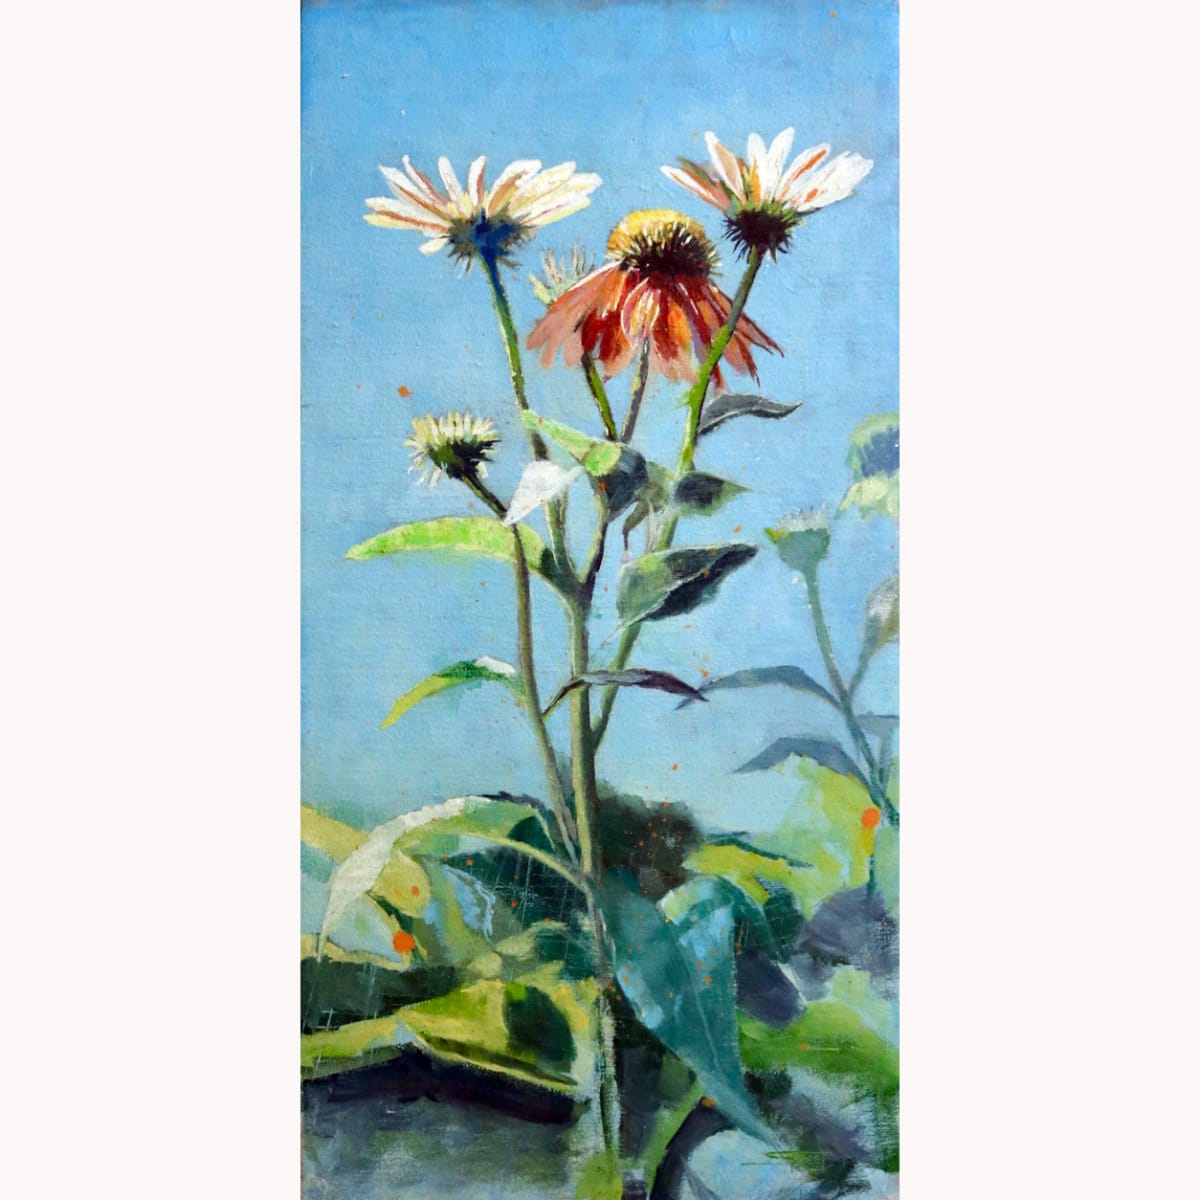 Coneflowers by Stacey B. Street 